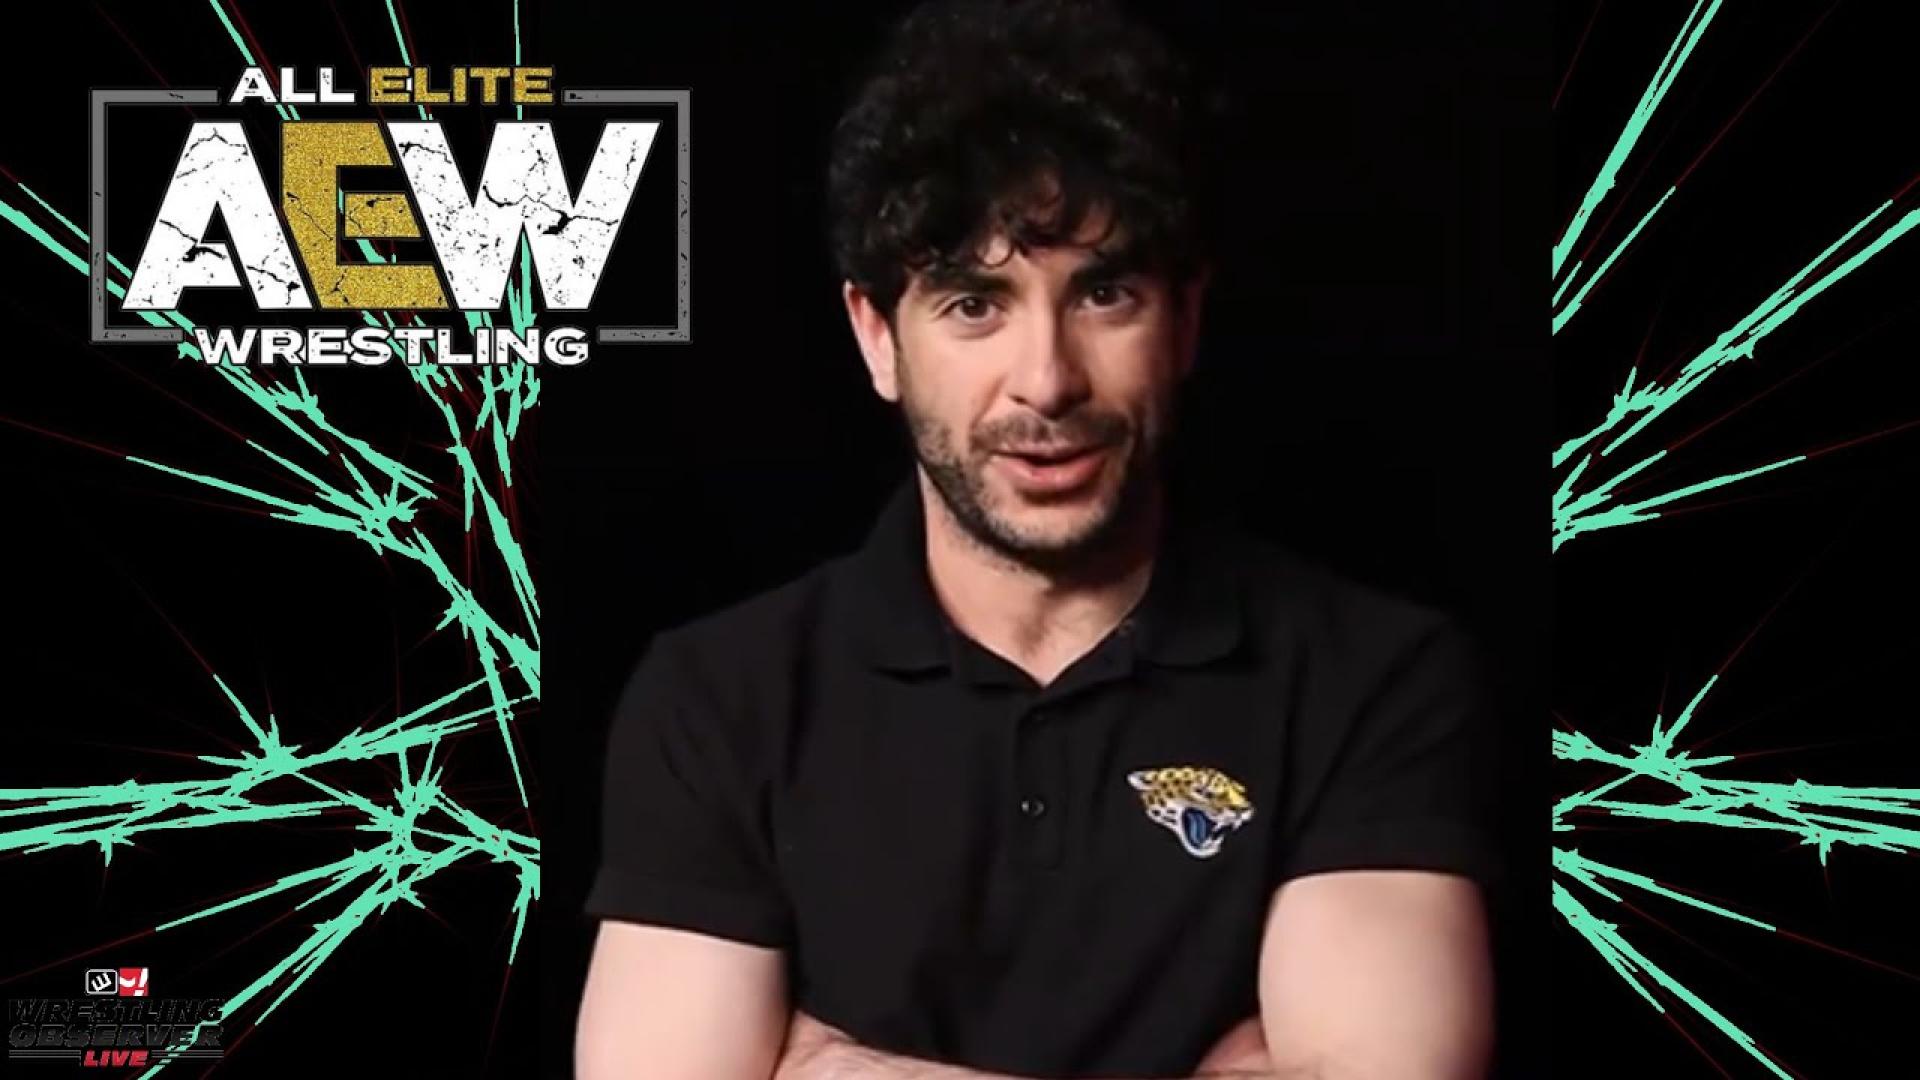 Discussions Have Taken Place Regarding the Inclusion of AEW on HBO Max, Reveals Tony Khan